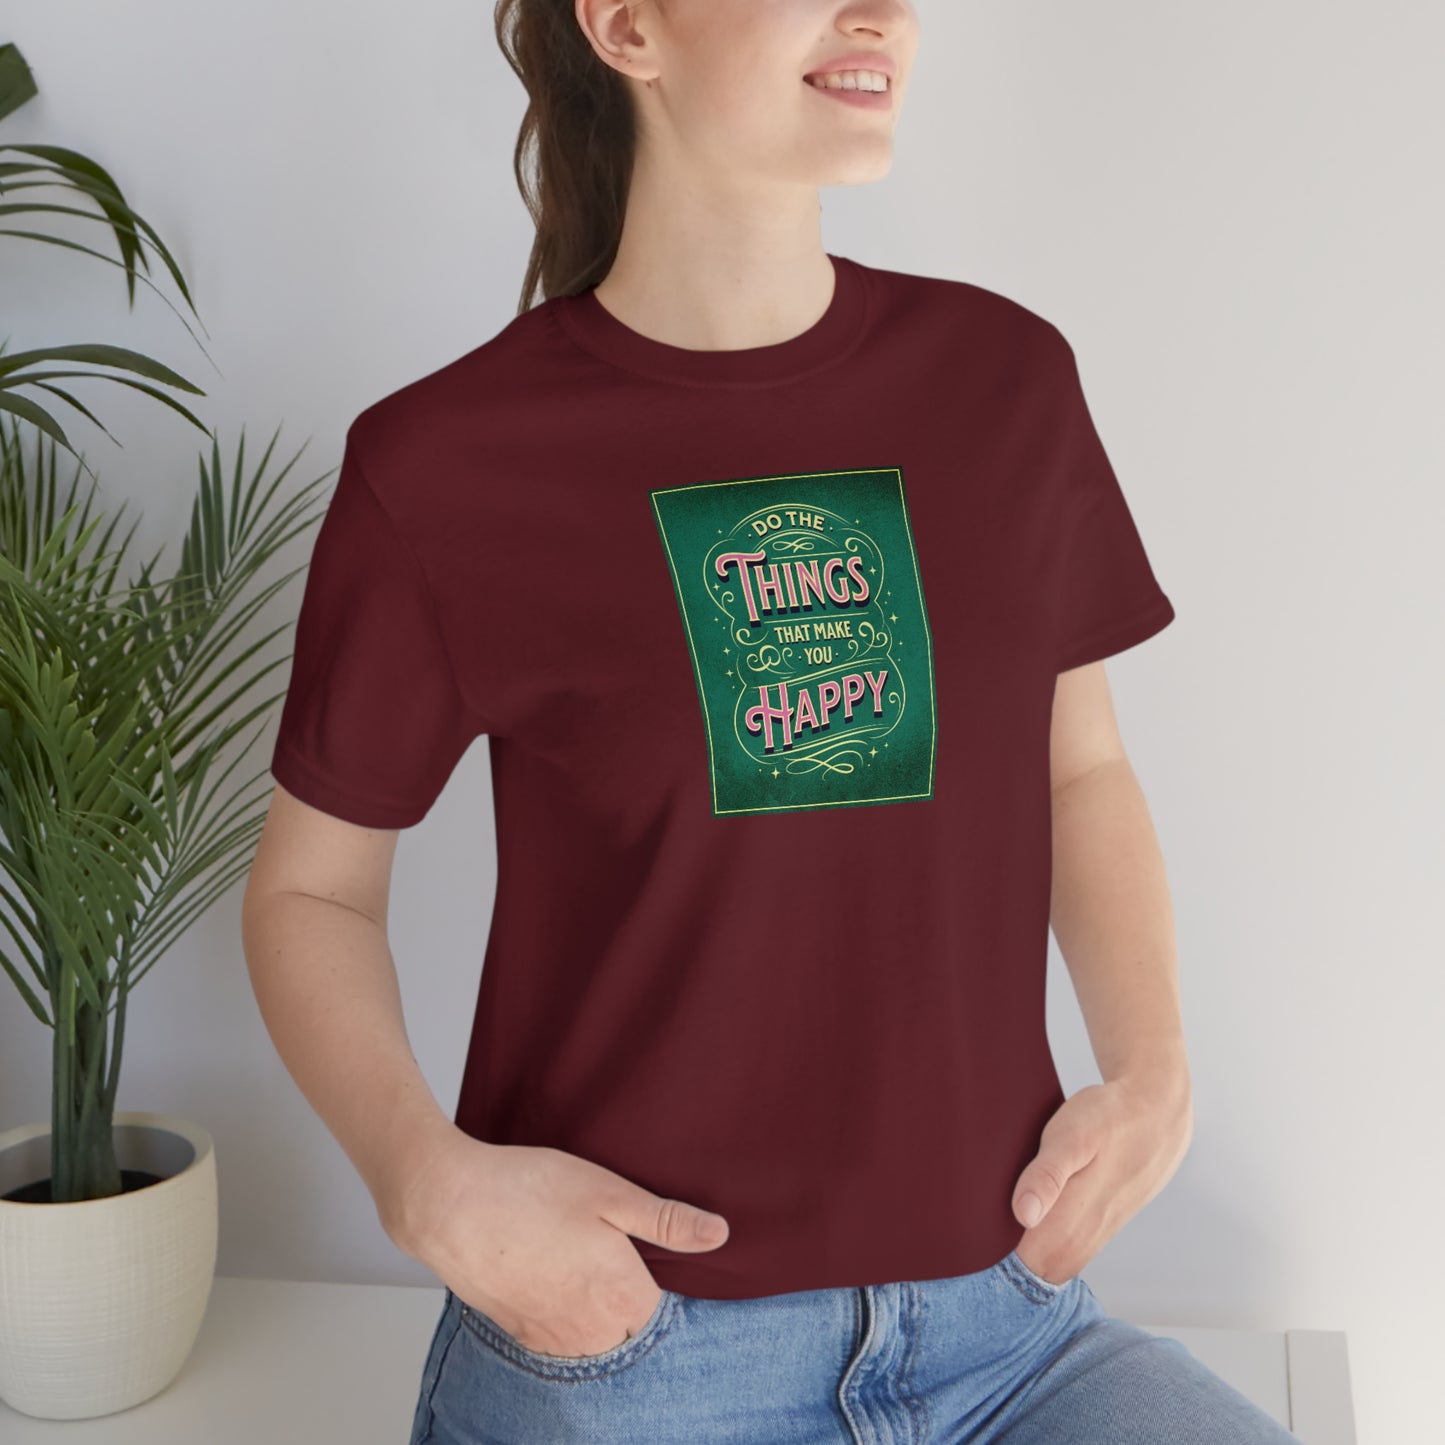 Do the Things That Make You Happy - Unisex Jersey Short Sleeve Tee